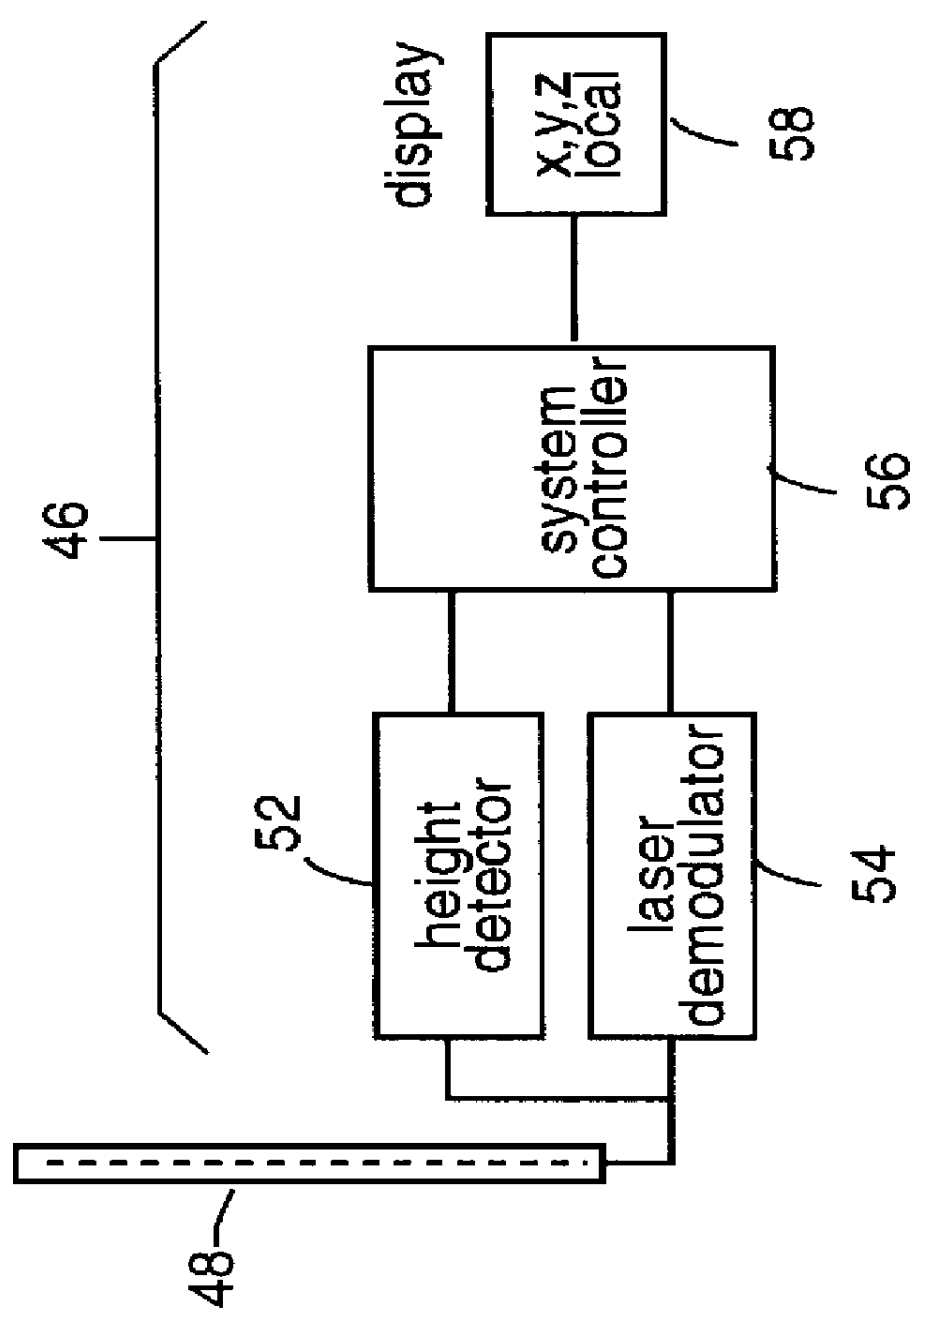 Multiple simultaneous laser-reference control system for construction equipment